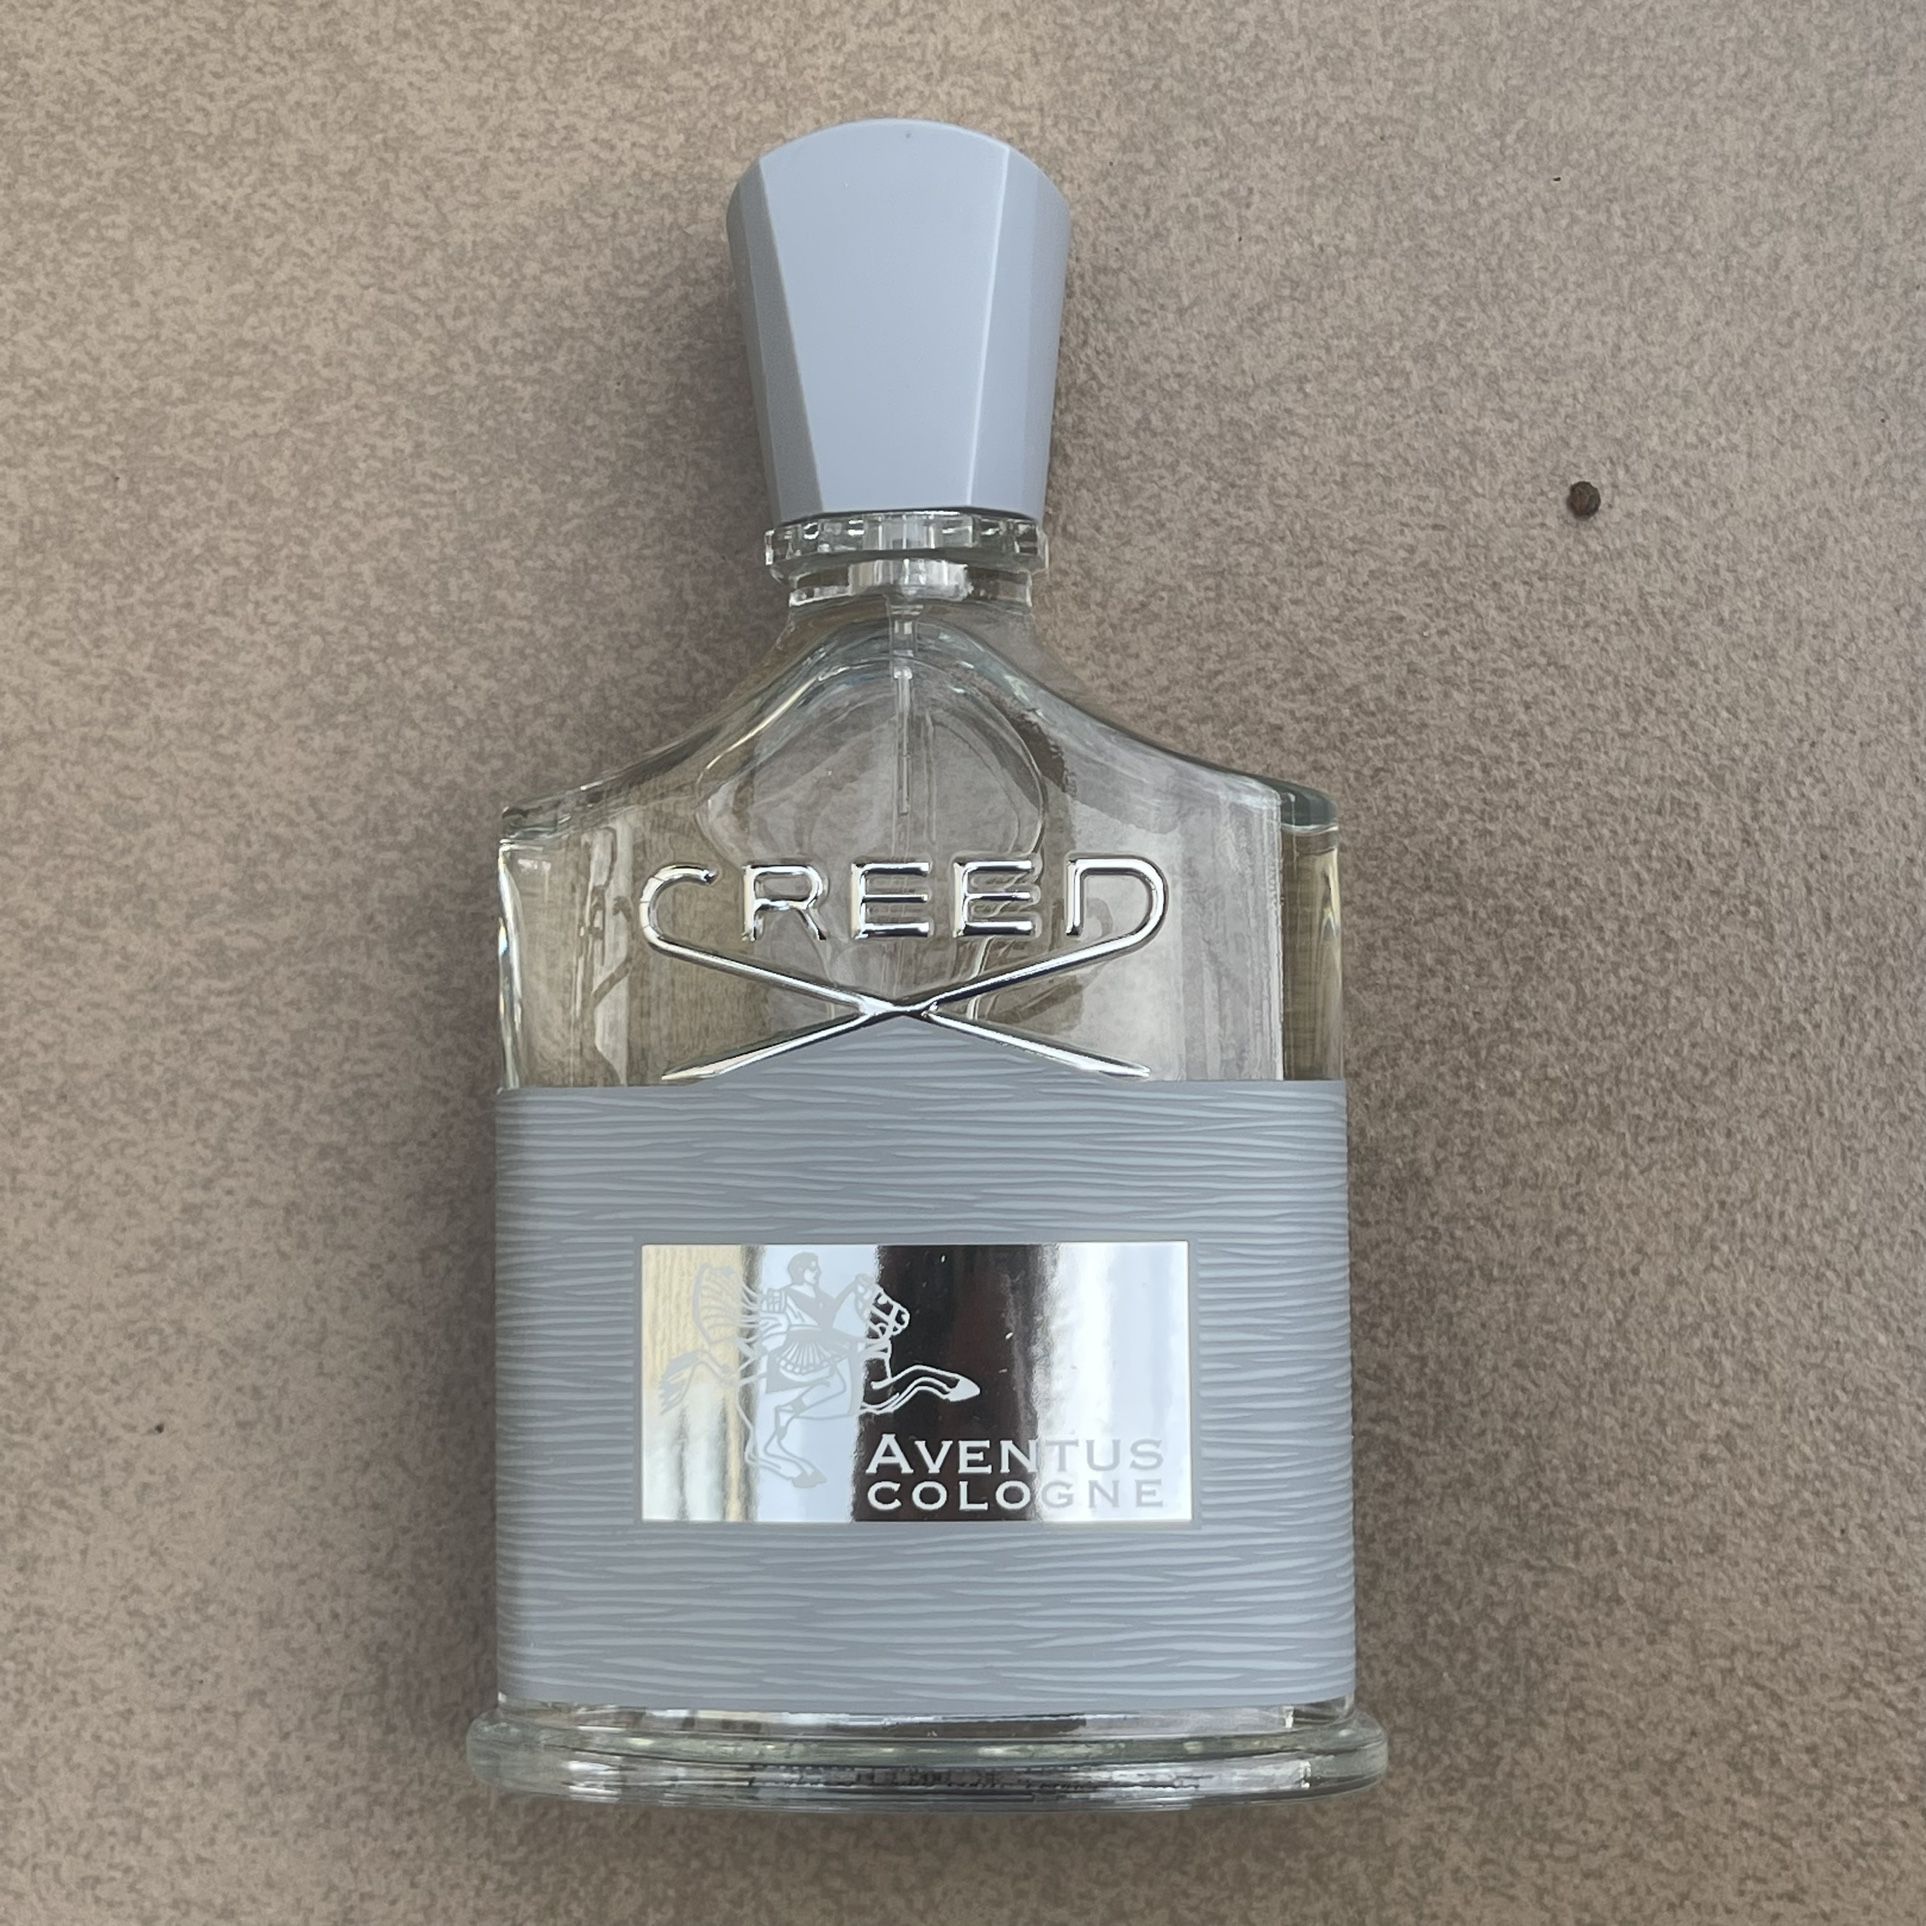 Creed Aventus Cologne, 3.3 Fl Oz PERFECT FATHERS DAY GIFT CHEAPEST ON THE MARKET